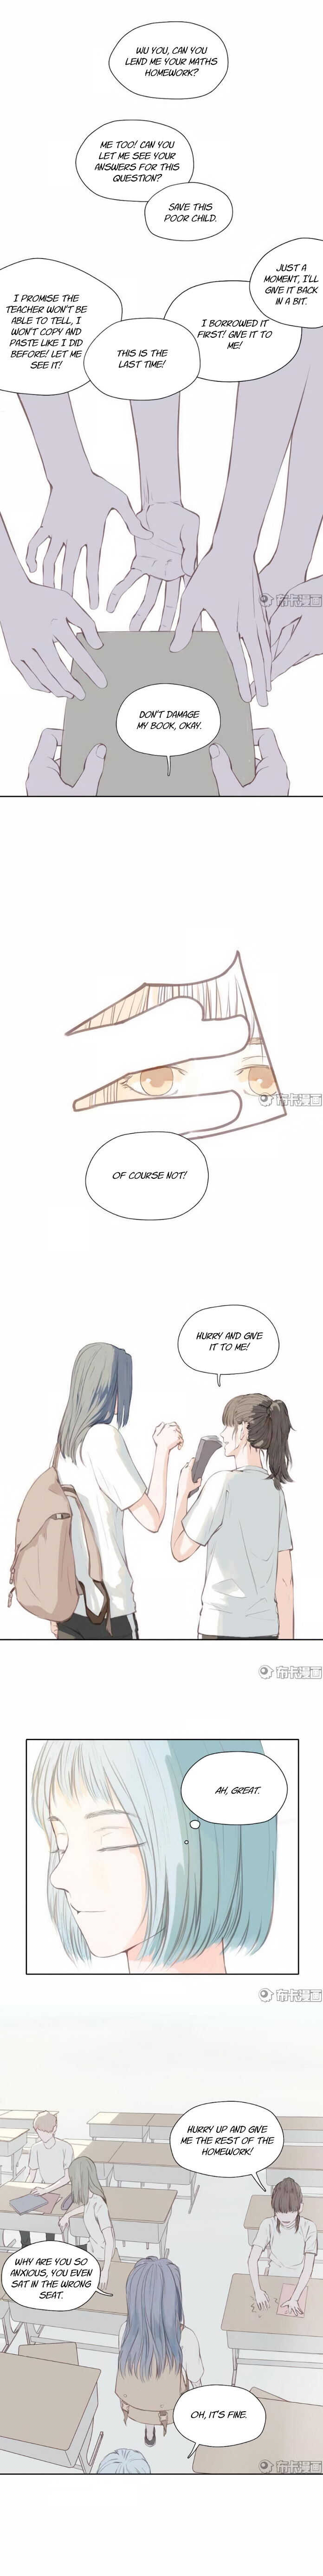 This Is Obviously A Yuri Manhua - Page 4